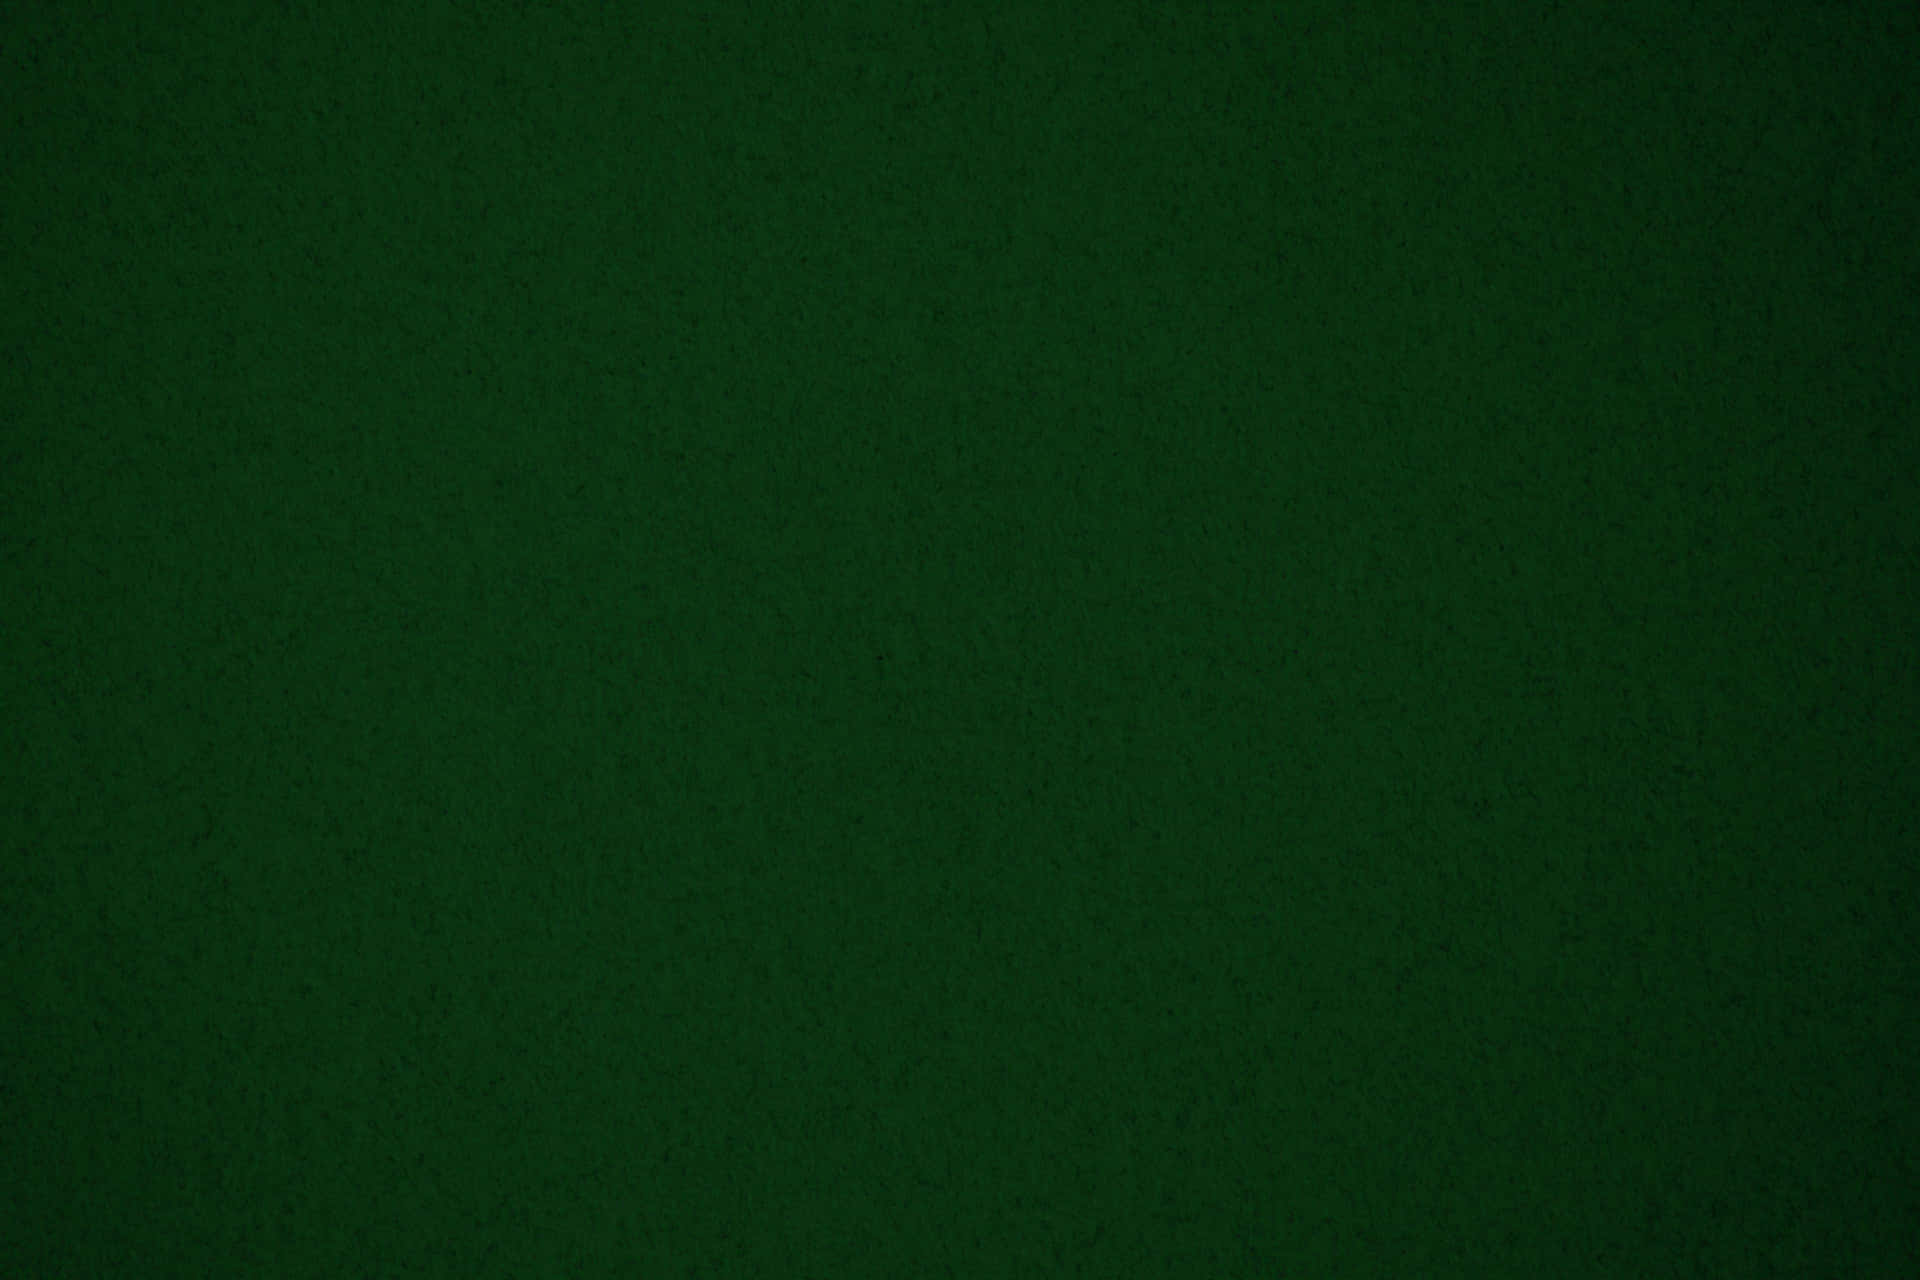 A beautiful dark green background with subtle hints of a marble effect